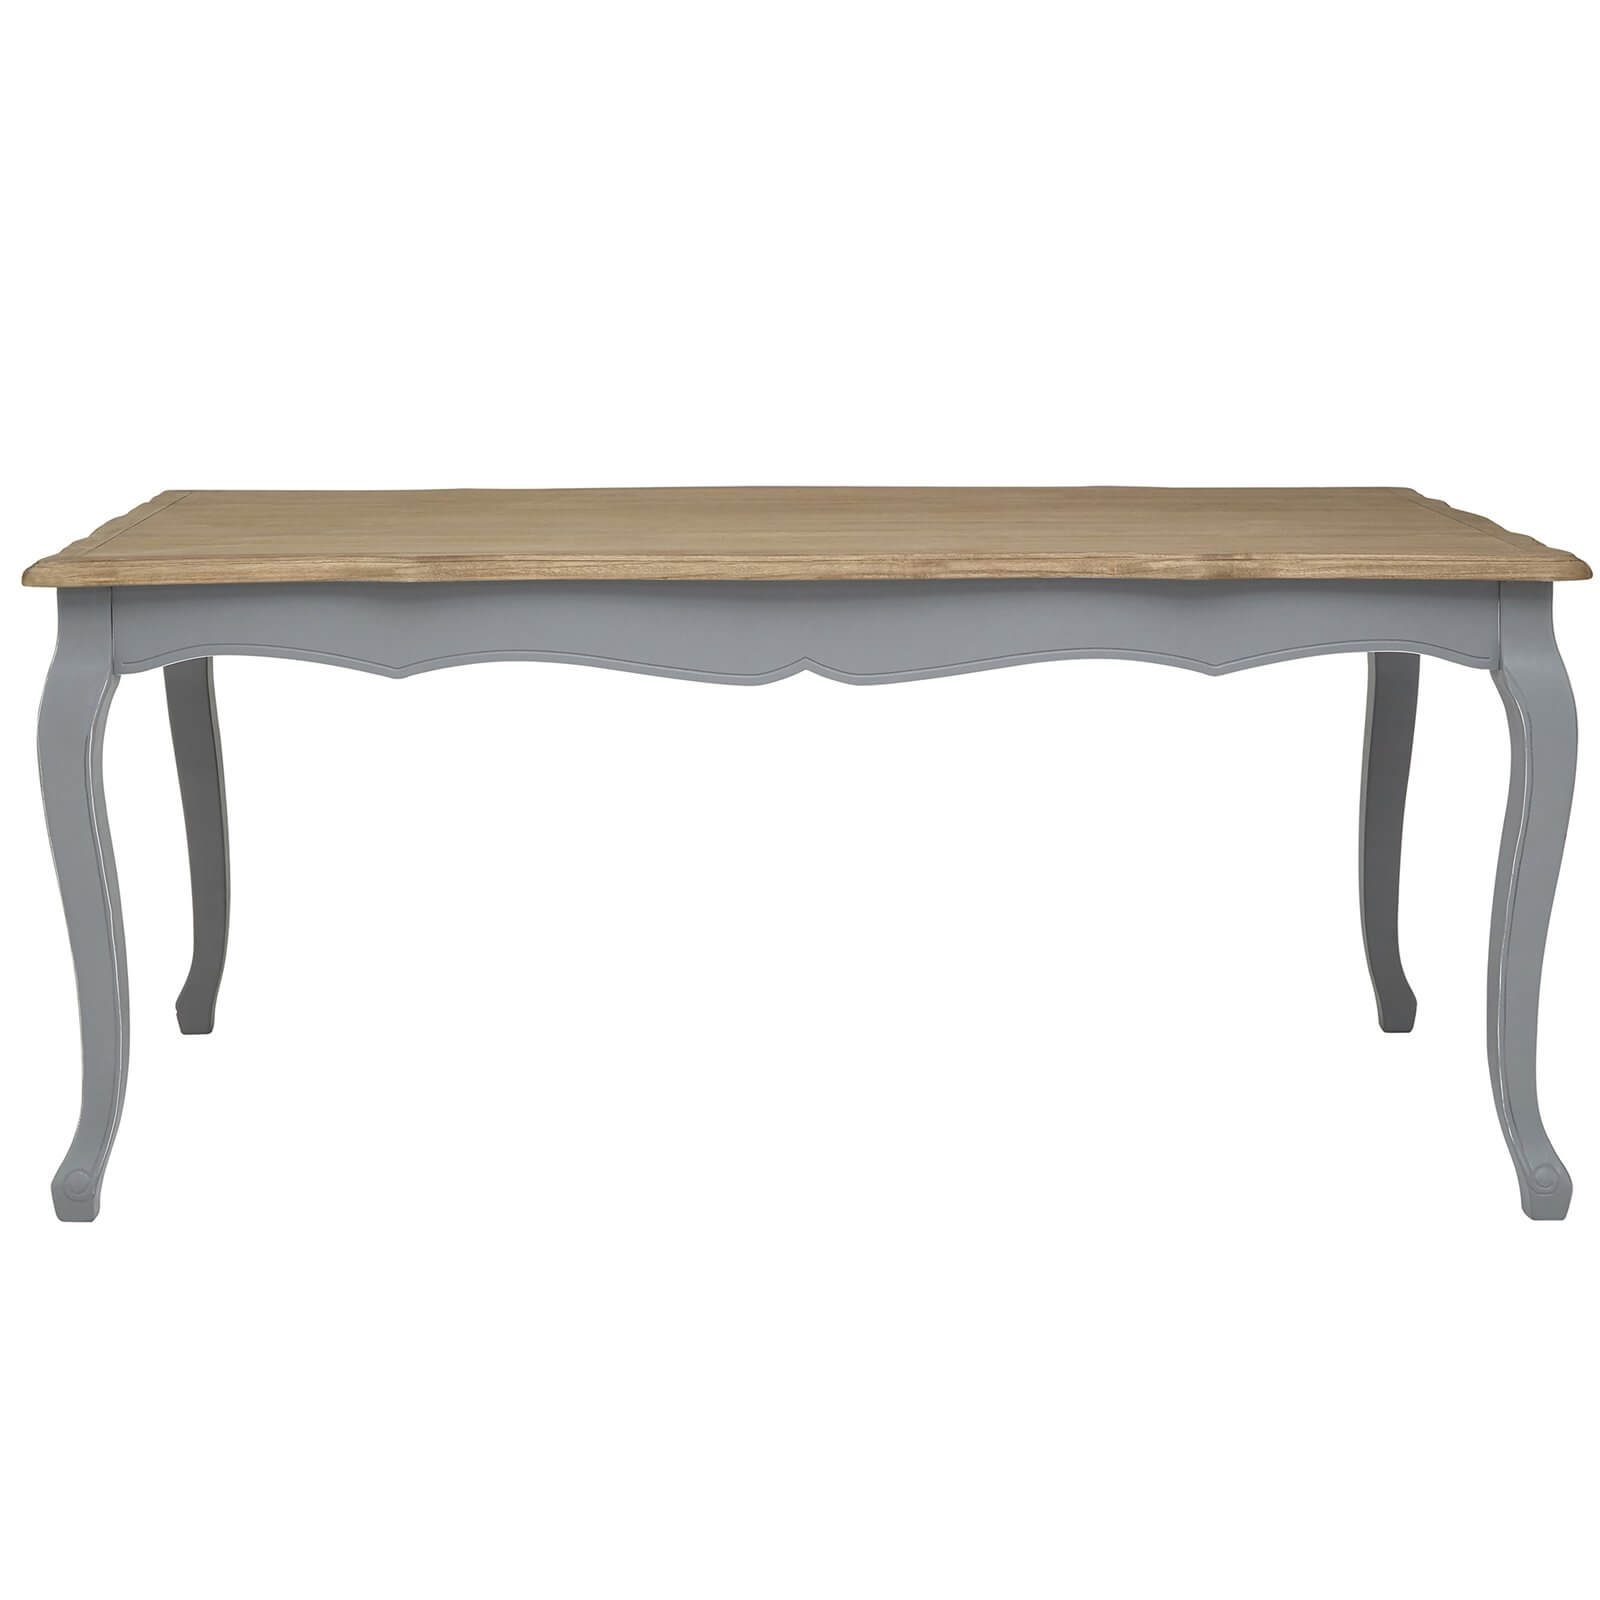 Henley Dining Table - Antique Grey